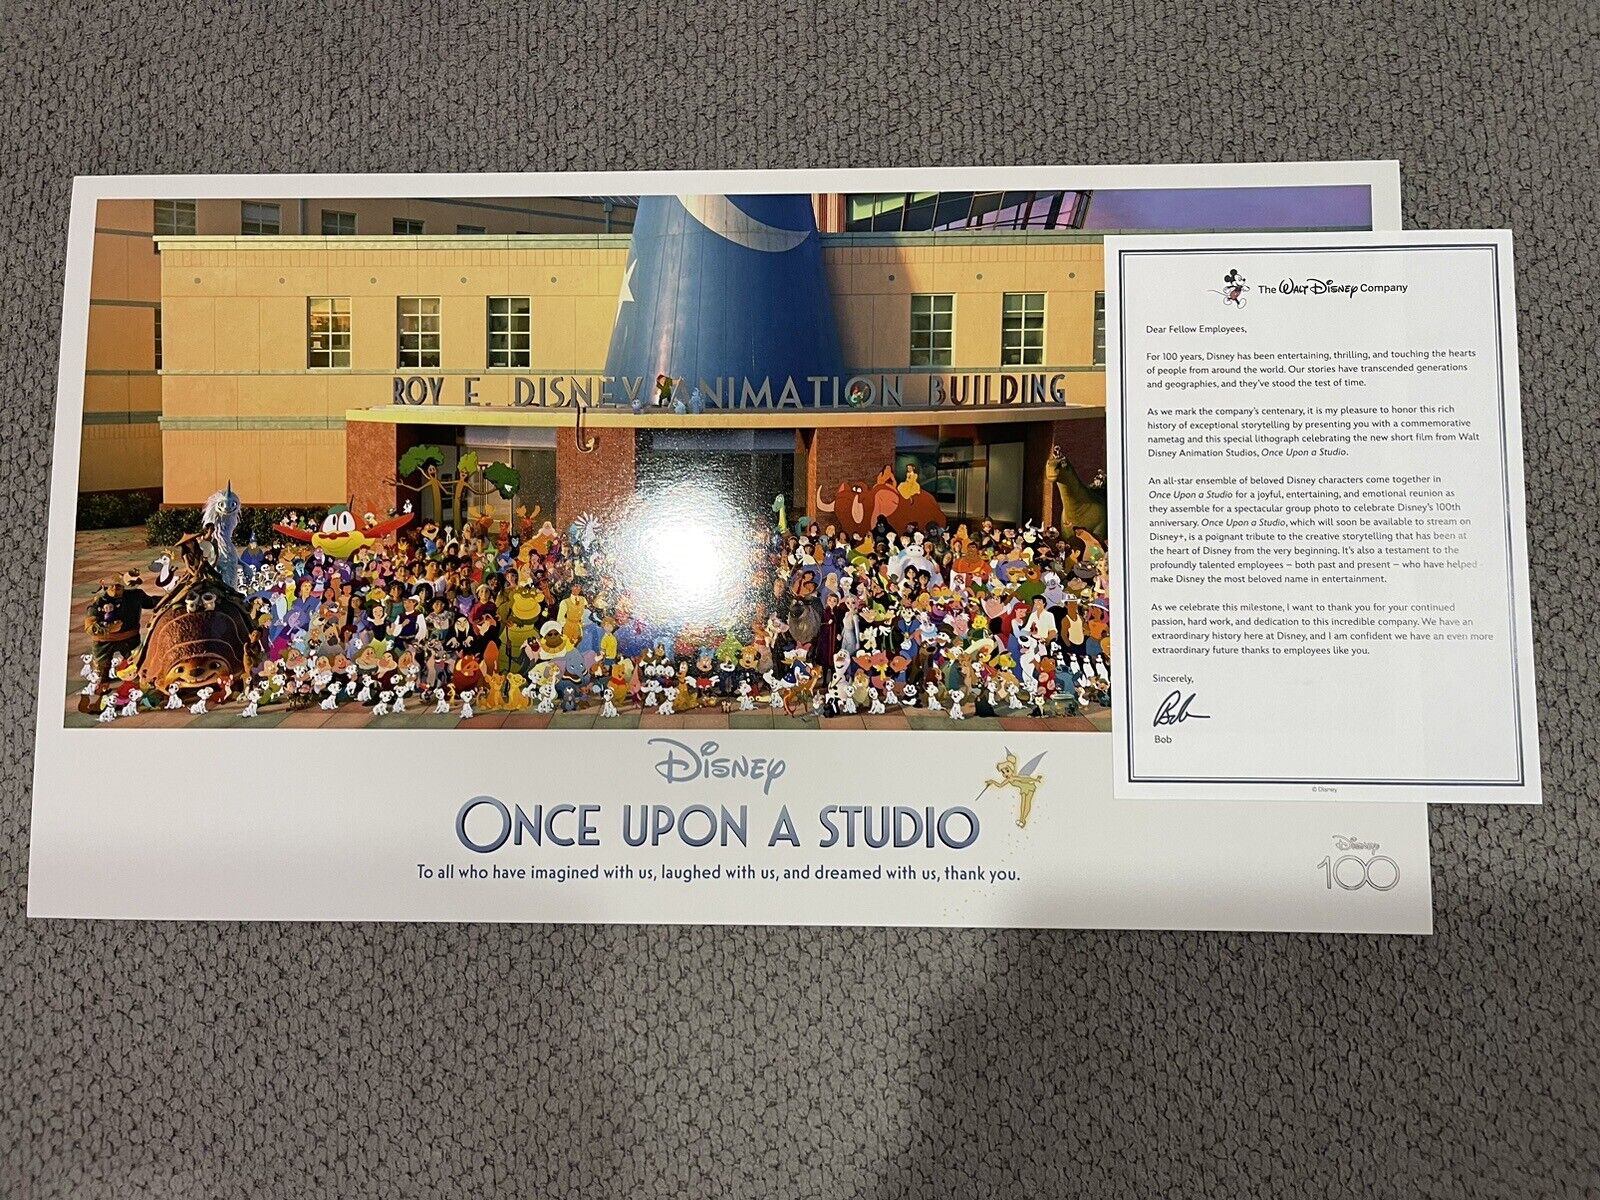 Disney 100 Once Upon a Studio Lithograph Animated Characters + Bob Iger Letter